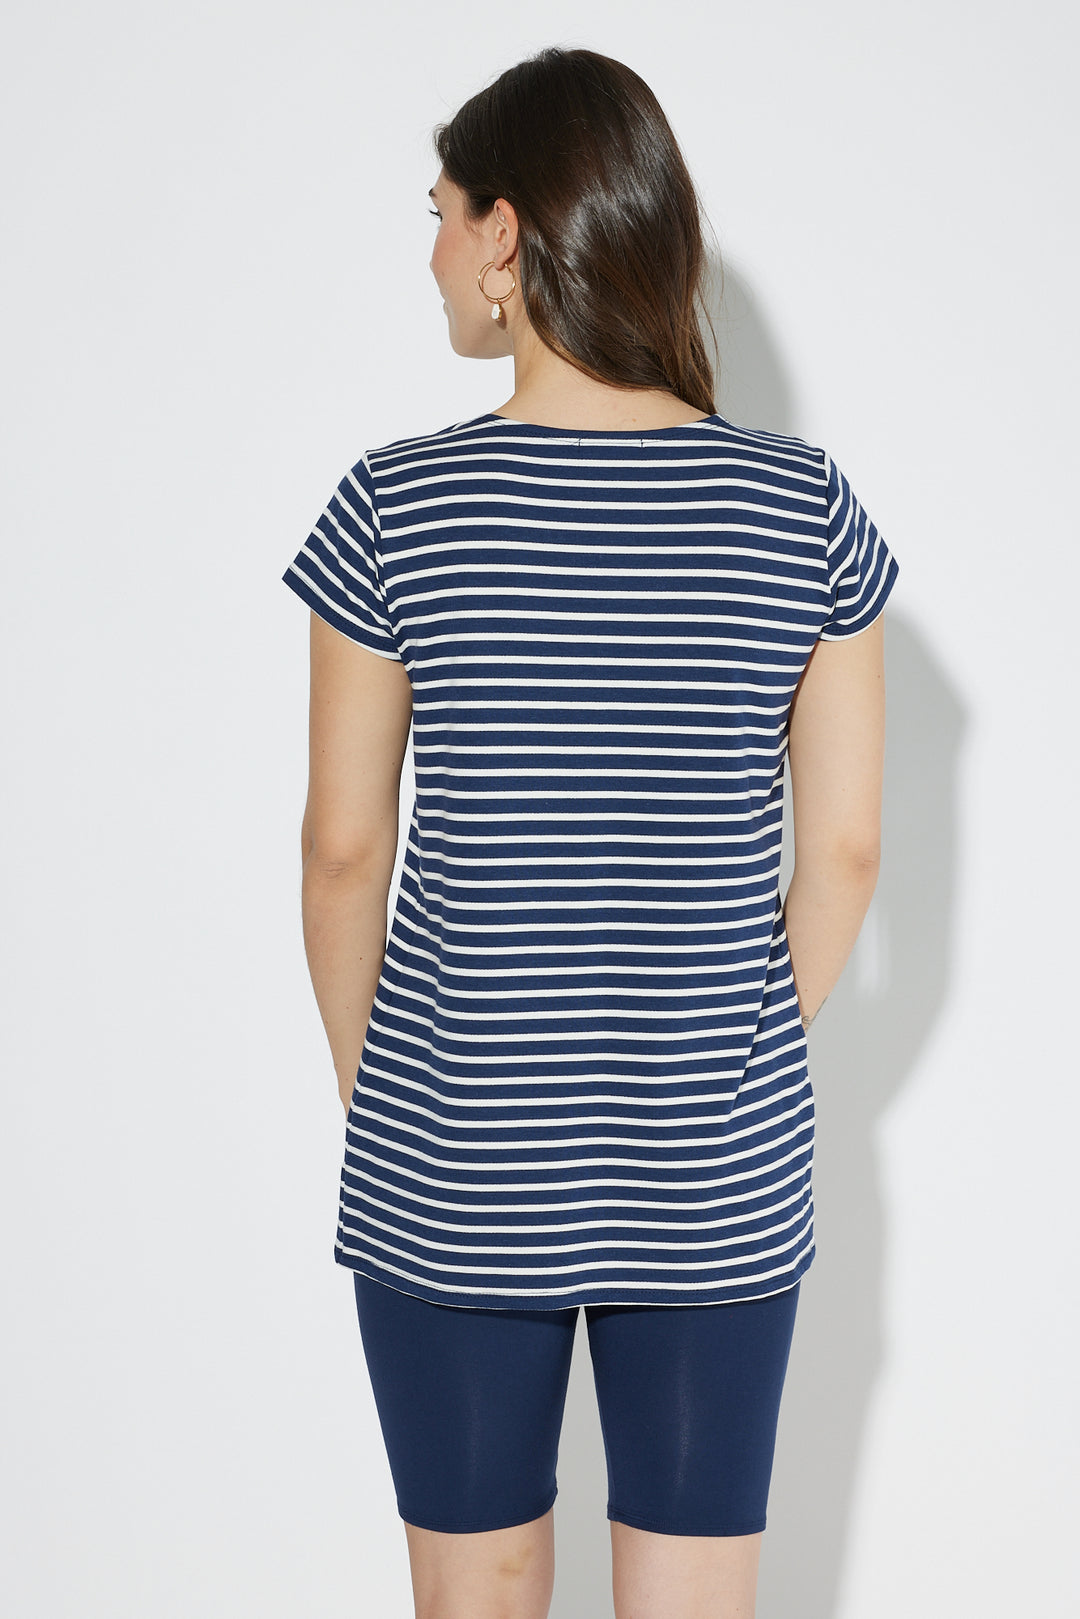 Peony tunic / Navy and white lines